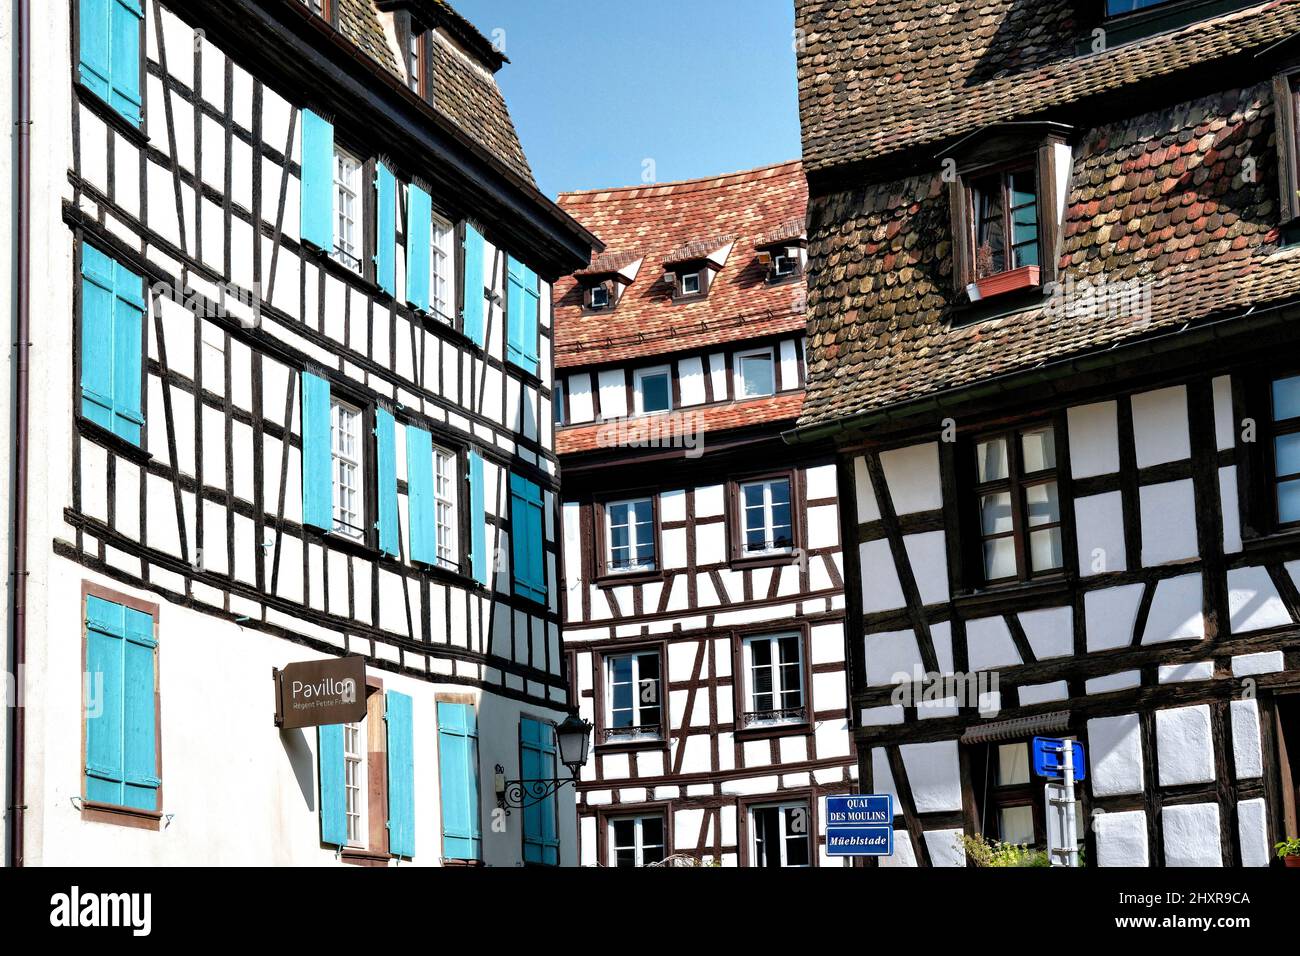 France, Strasbourg, the historic center listed as World Heritage by UNESCO, La Petite France, around the Benjamin Zix square. Stock Photo